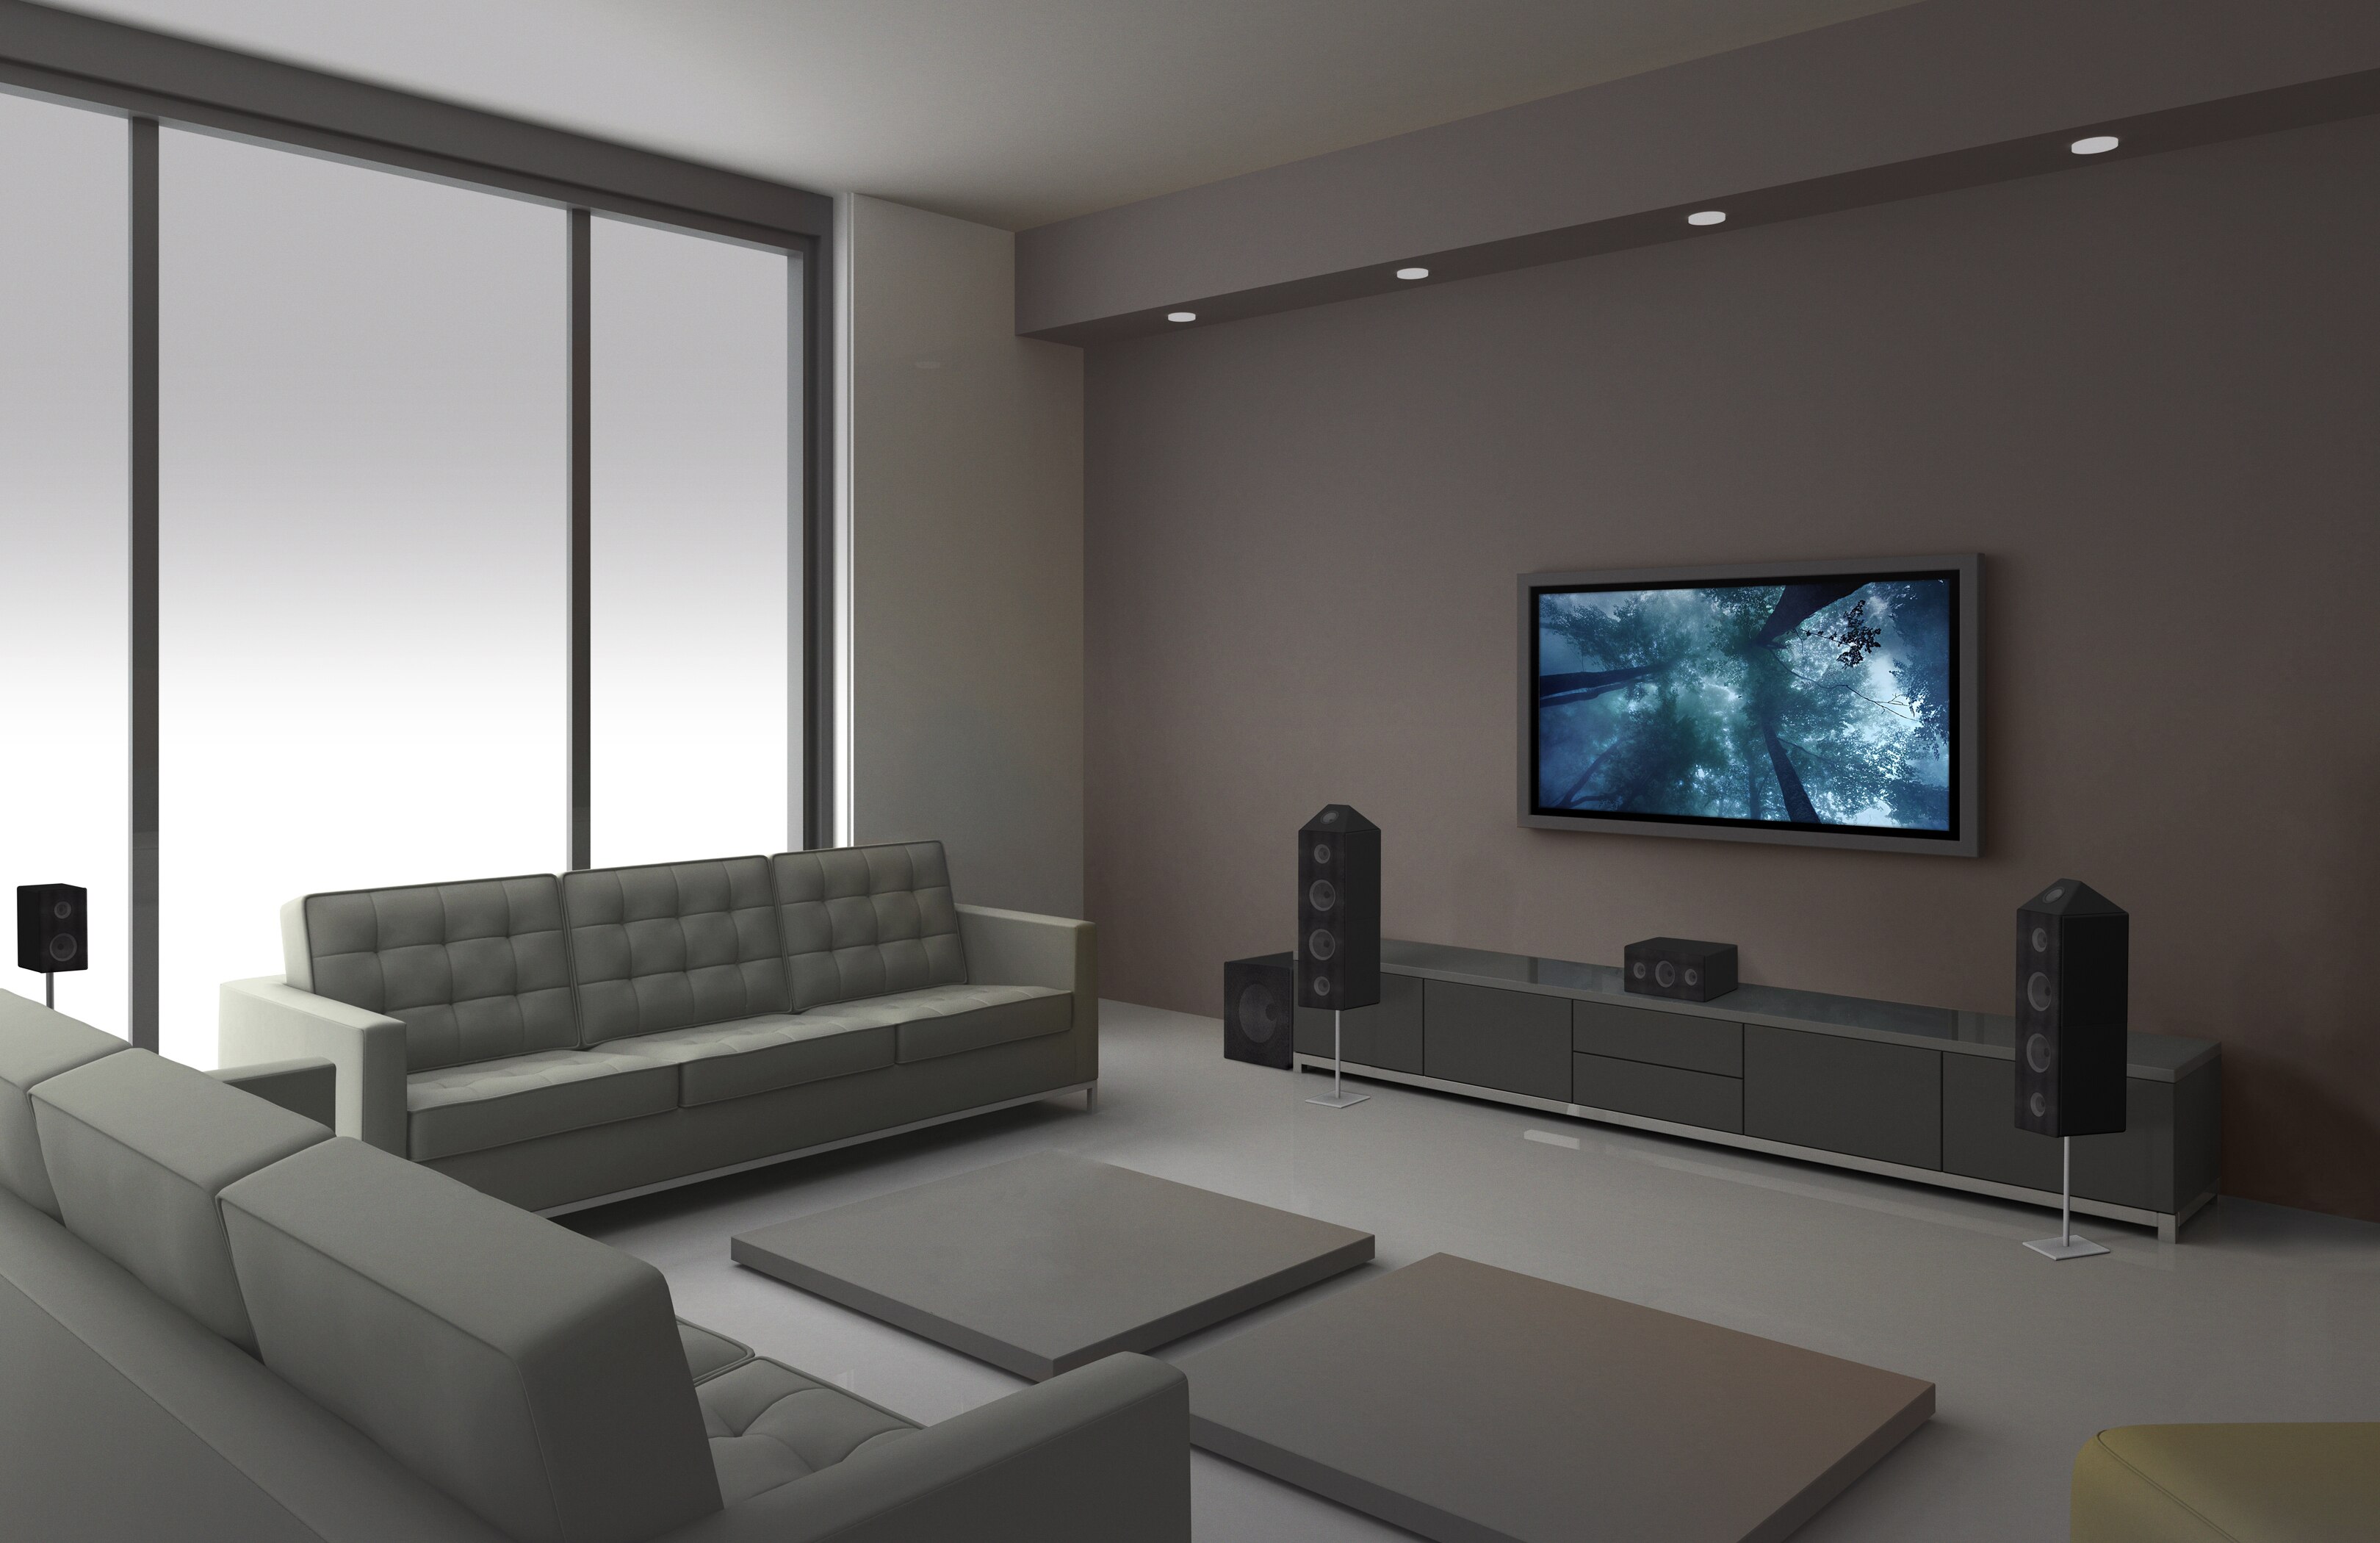 best budget dolby atmos home theater